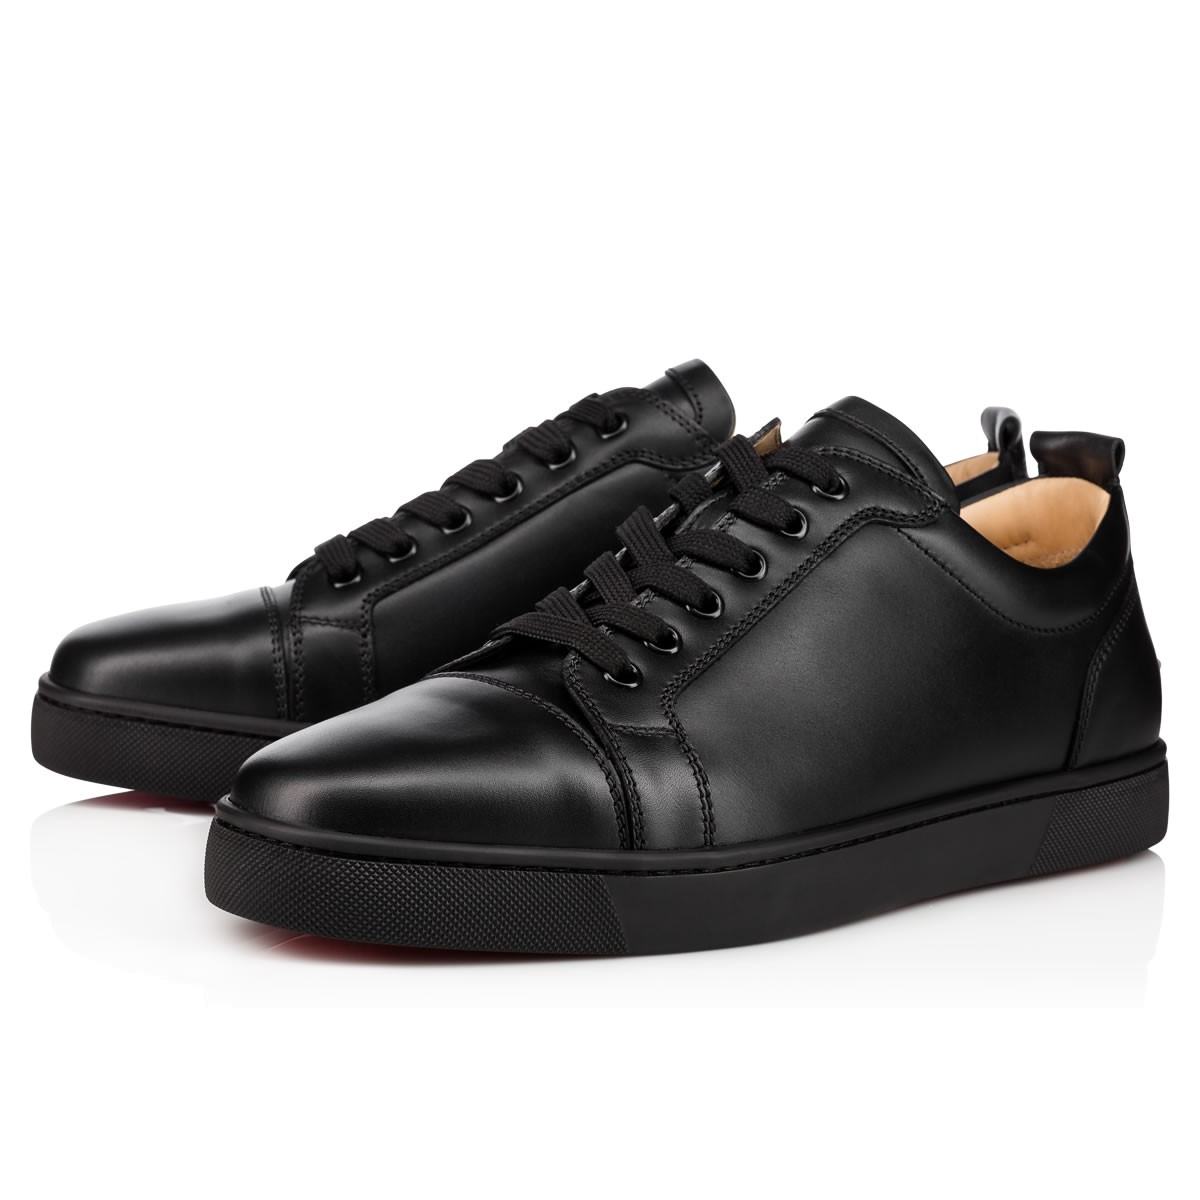 louboutin prix chaussures homme